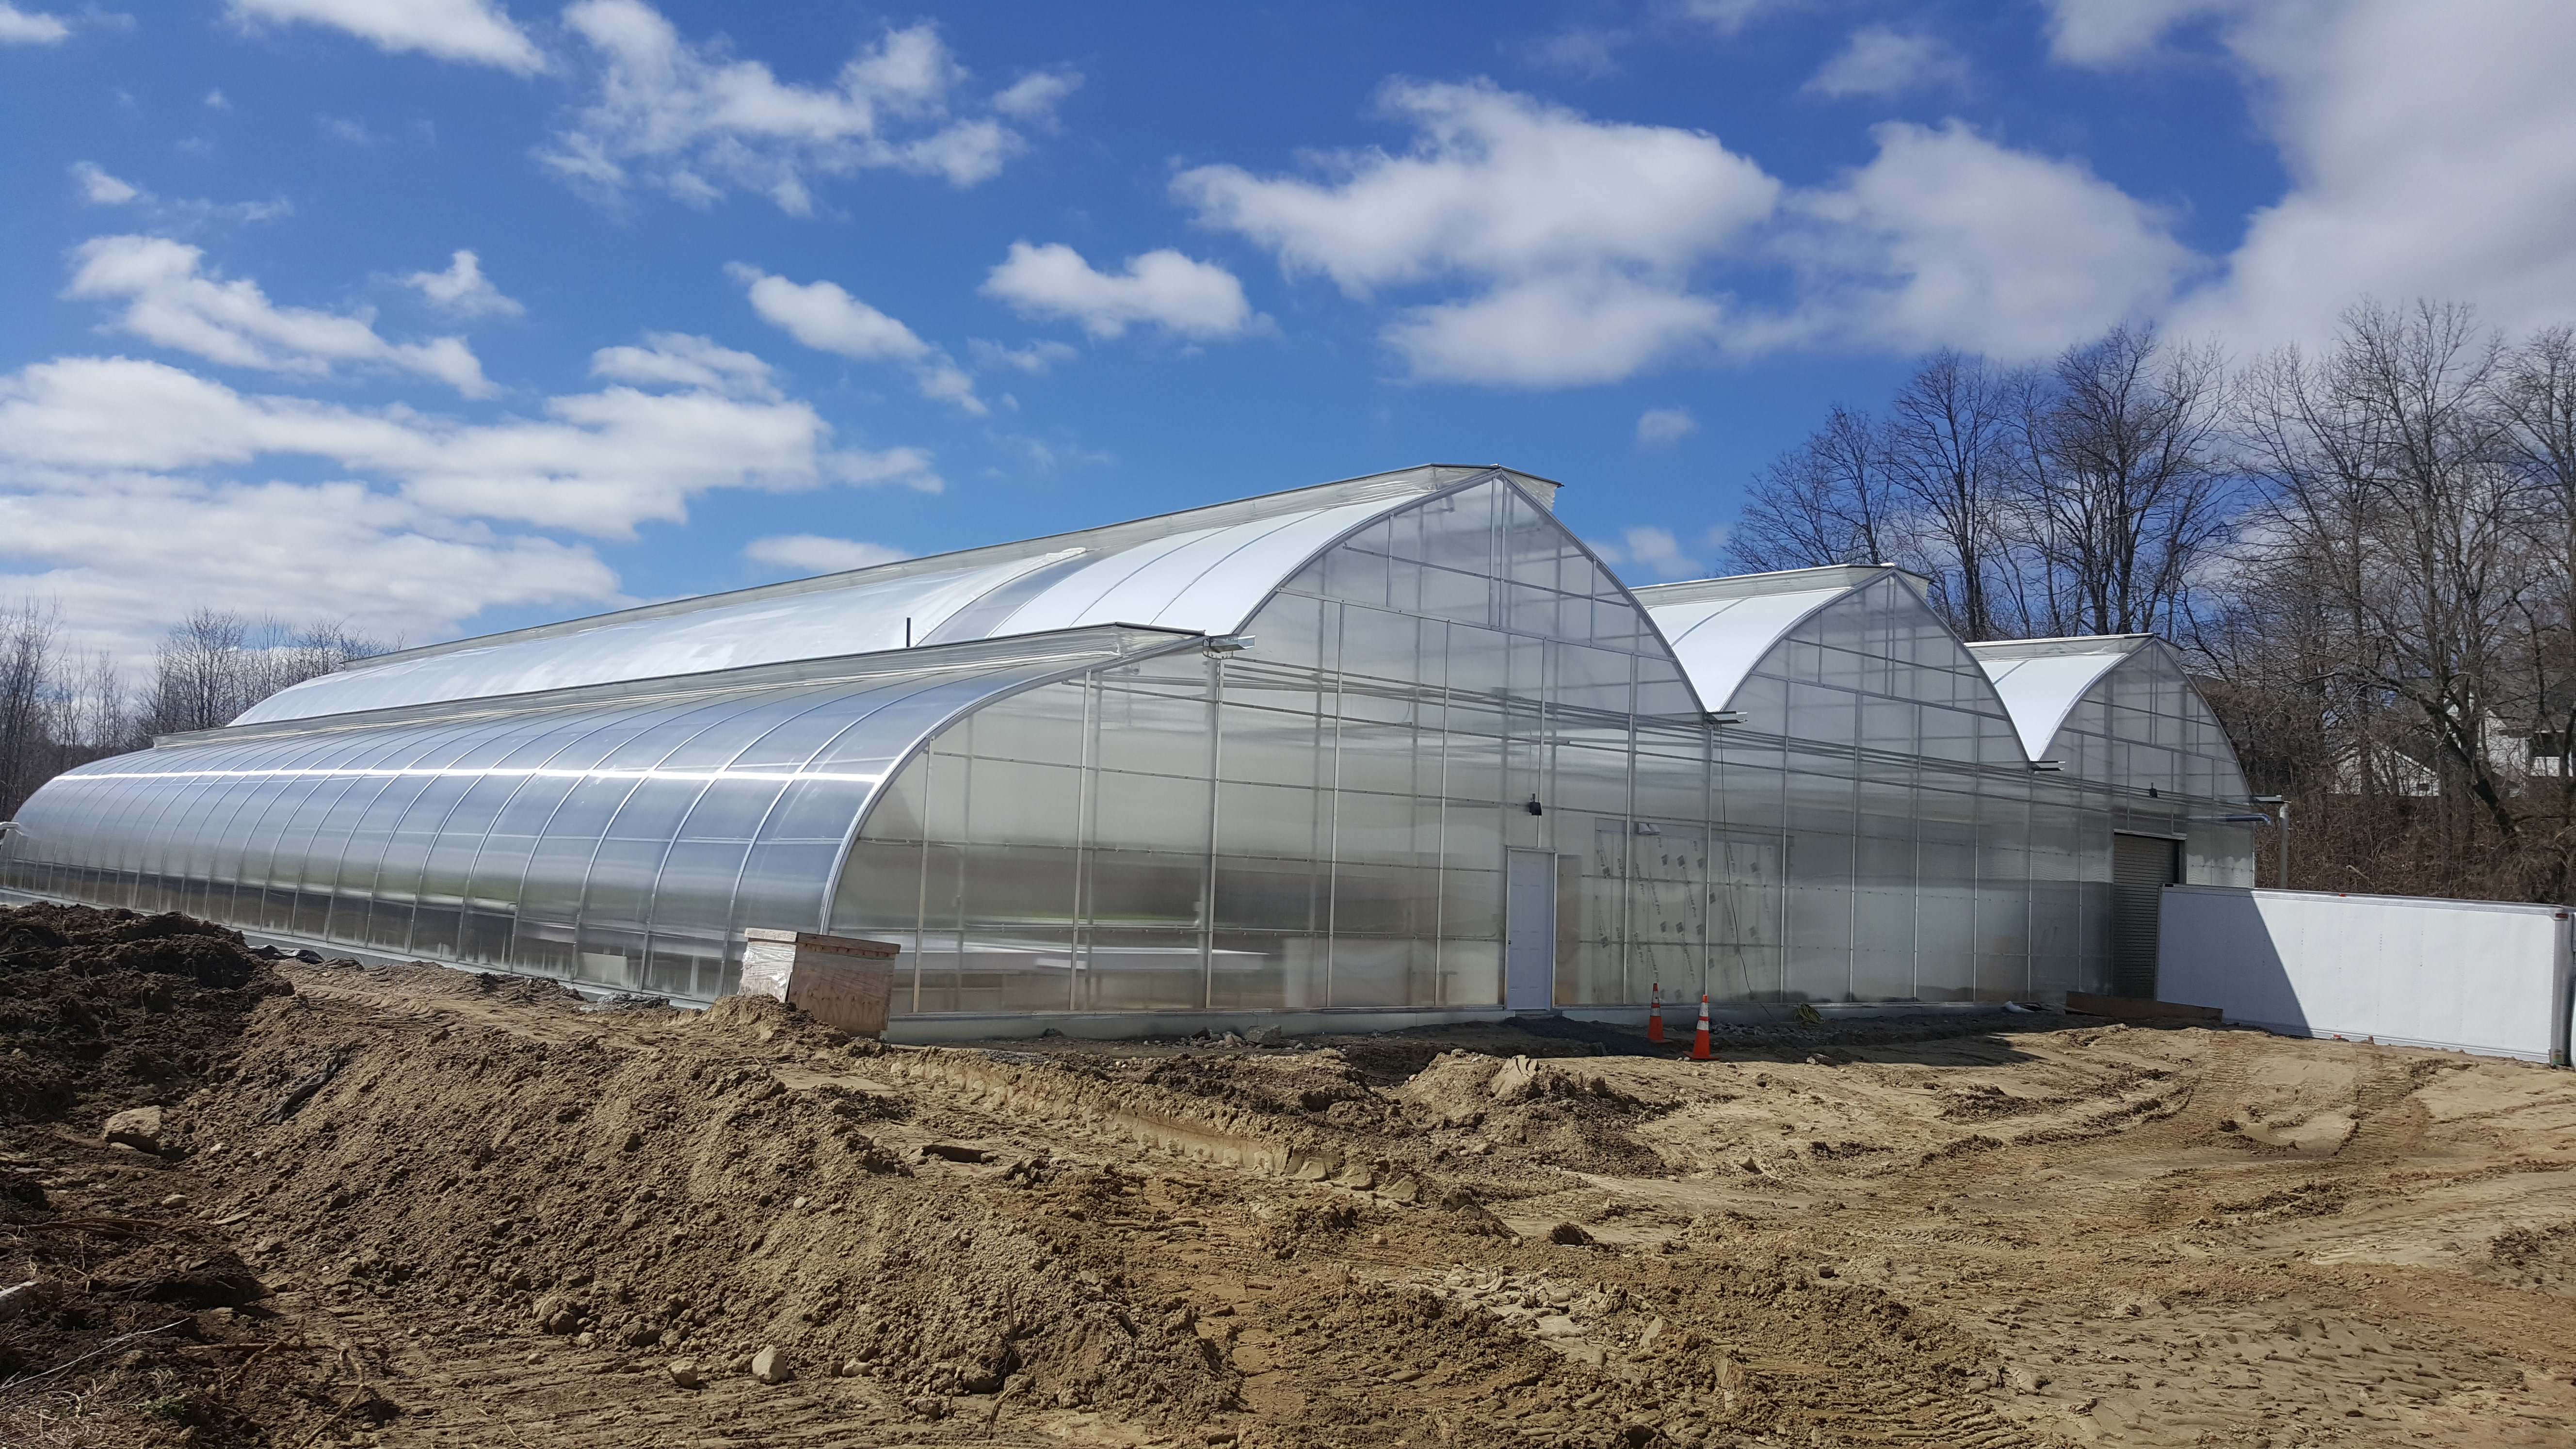 Large scale hydroponic greenhouse Wellspring Harvest to open in Indian Orchard, Springfield